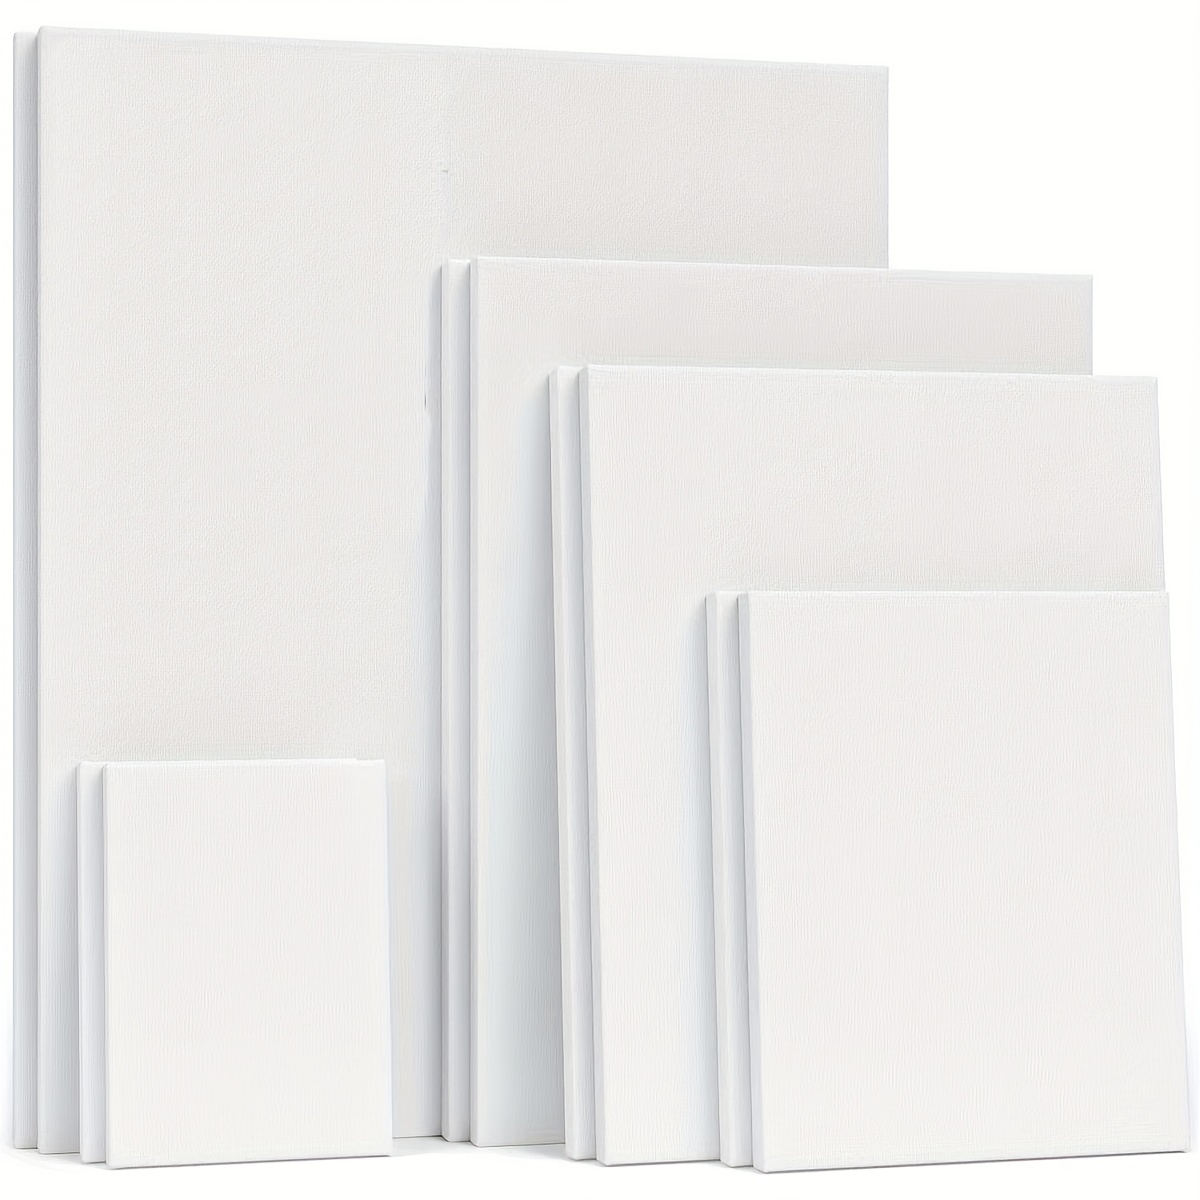 4pcs Stretched Canvas, A Set Of 4 Size, 100% Cotton Canvases For Painting,  8 Oz Gesso-Primed, Art Supplies For Acrylic And Oil Painting.